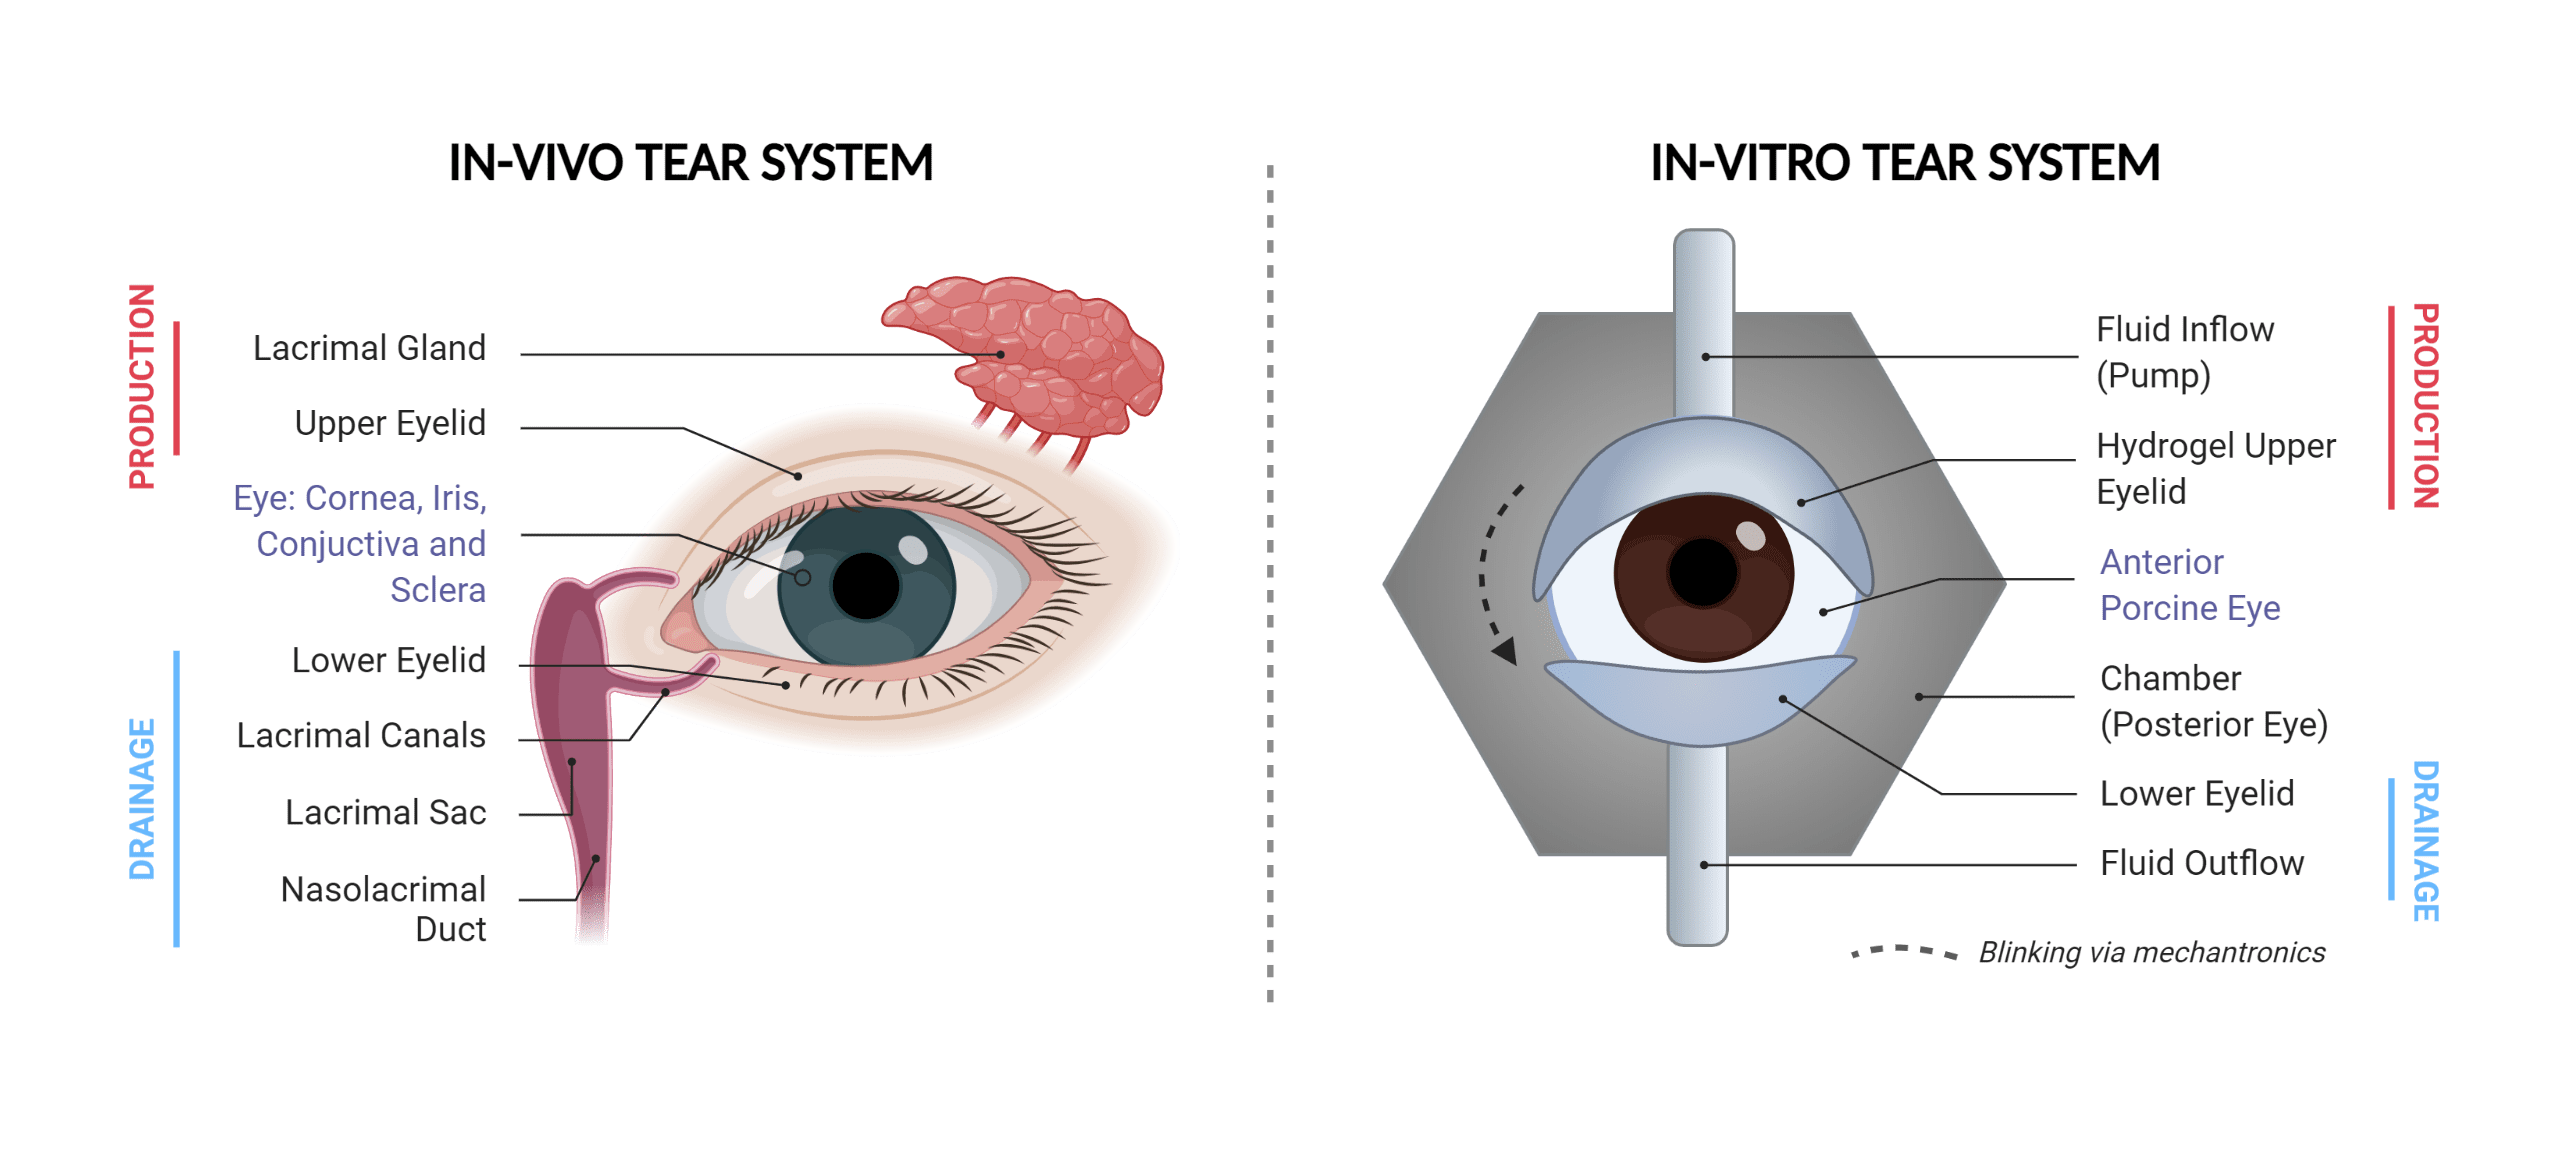 Figure 2: Schematic of the engineered in-vitro tear system: Left shows the anatomy of the body’s tear system. Right shows a schematic of the engineered tear system for our model. Components involved in tear production and drainage are labelled.